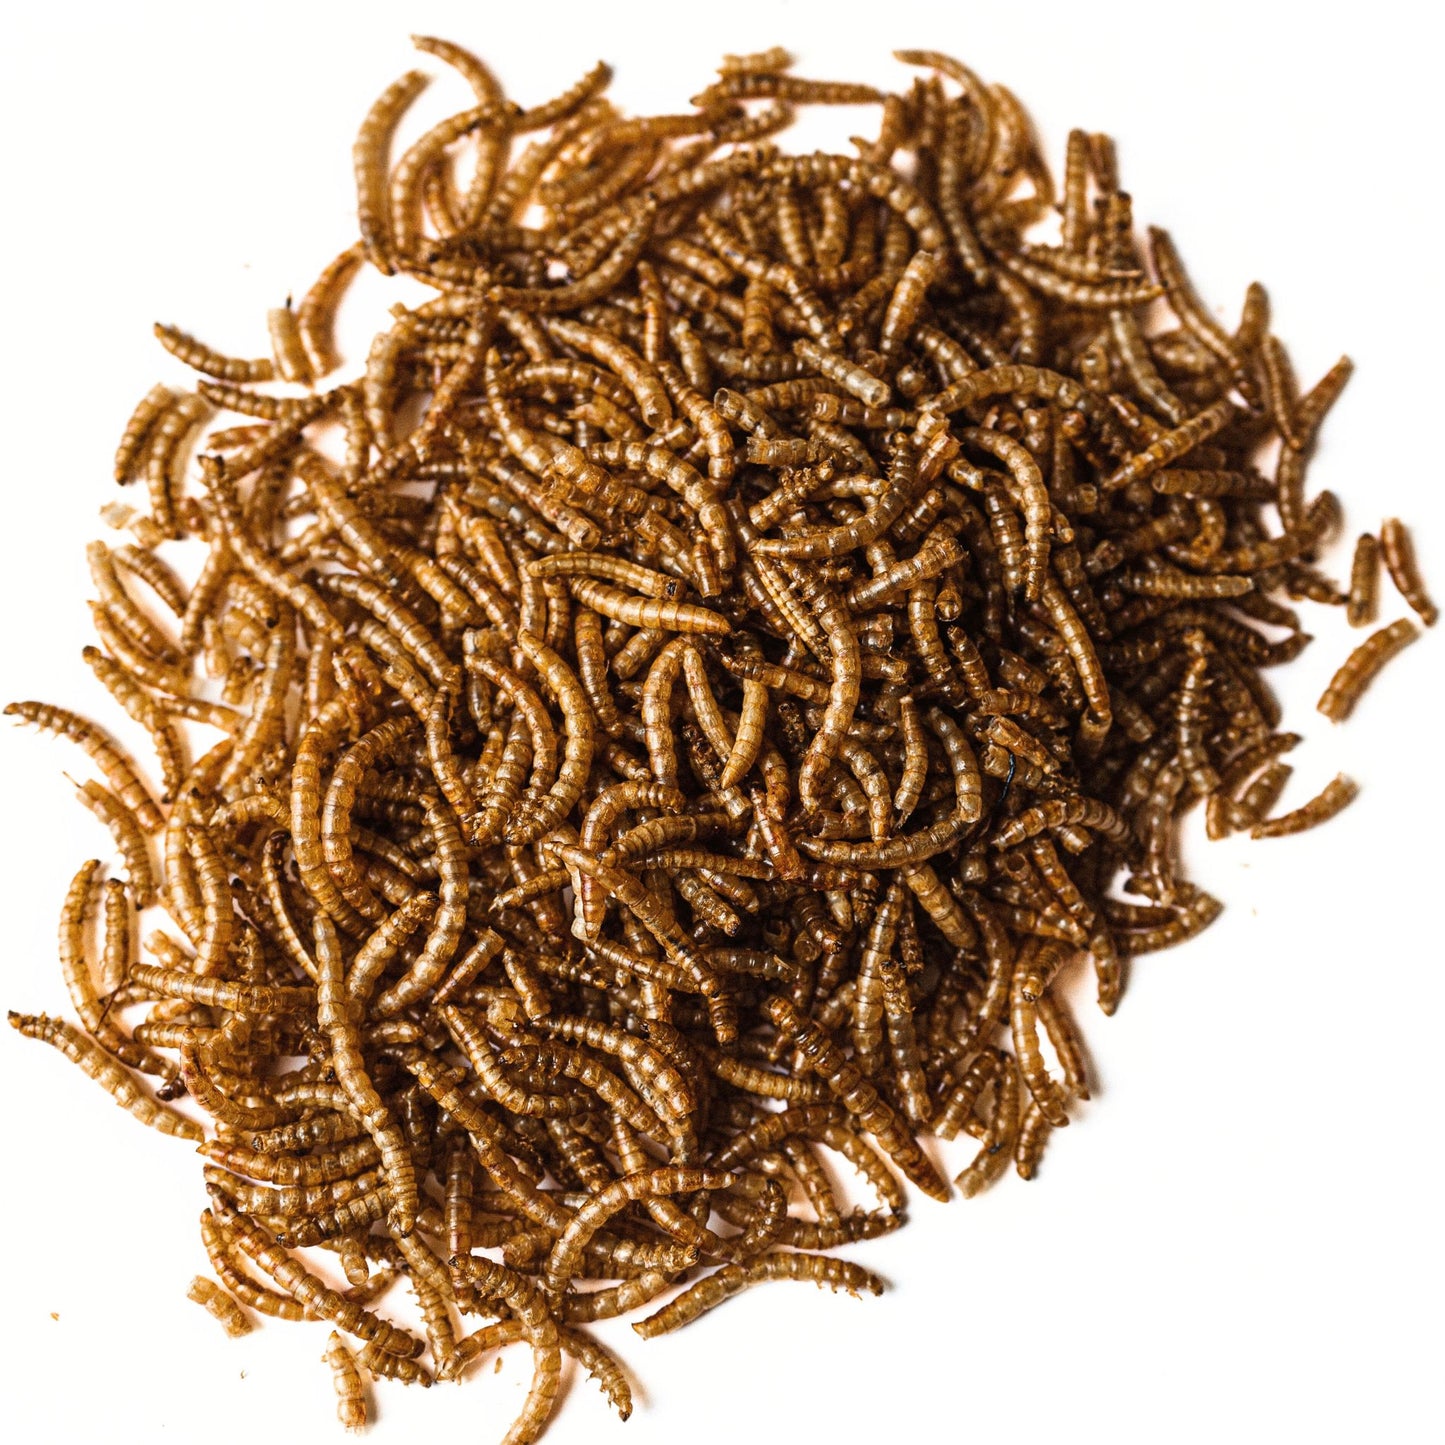 Dried Mealworms - Animal Feed